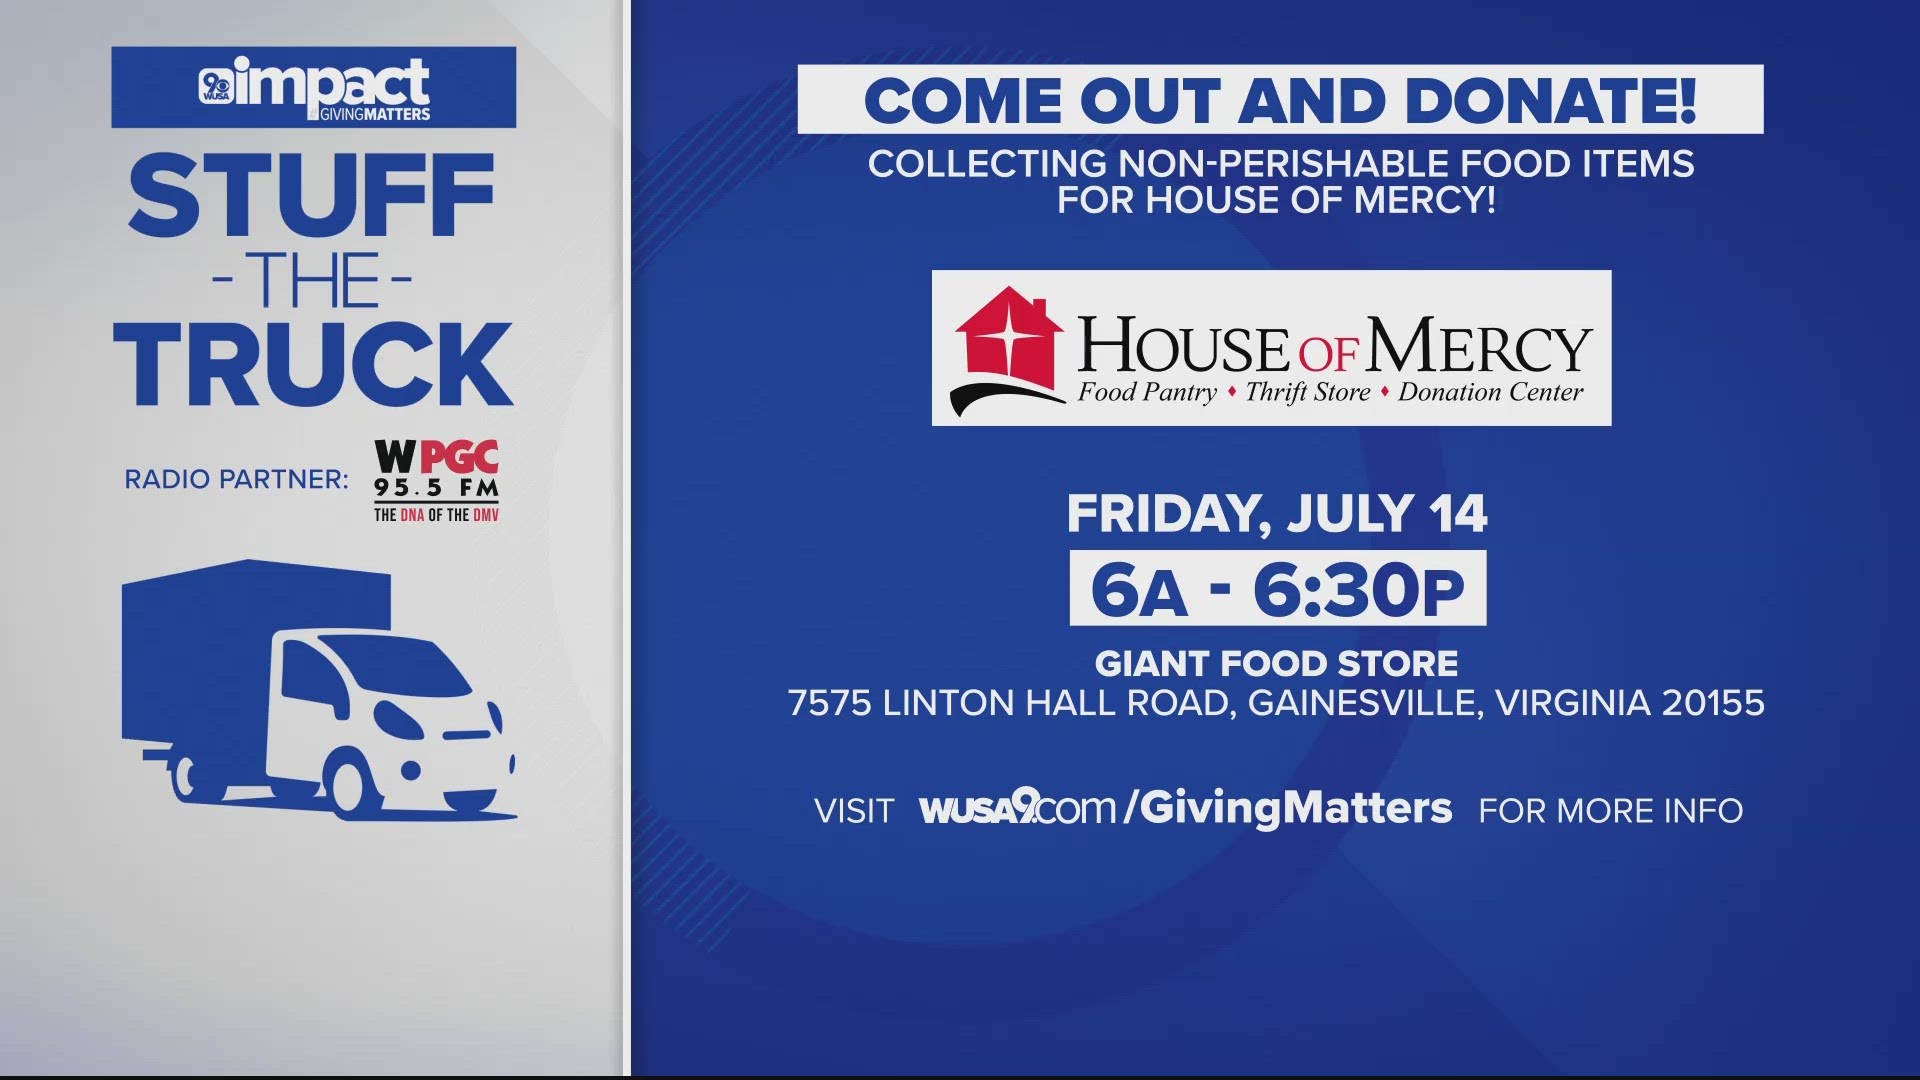 From 6 a.m. until 6:30 p.m., WUSA9 will be at the Giant on Linton Hall Road in Gainesville.